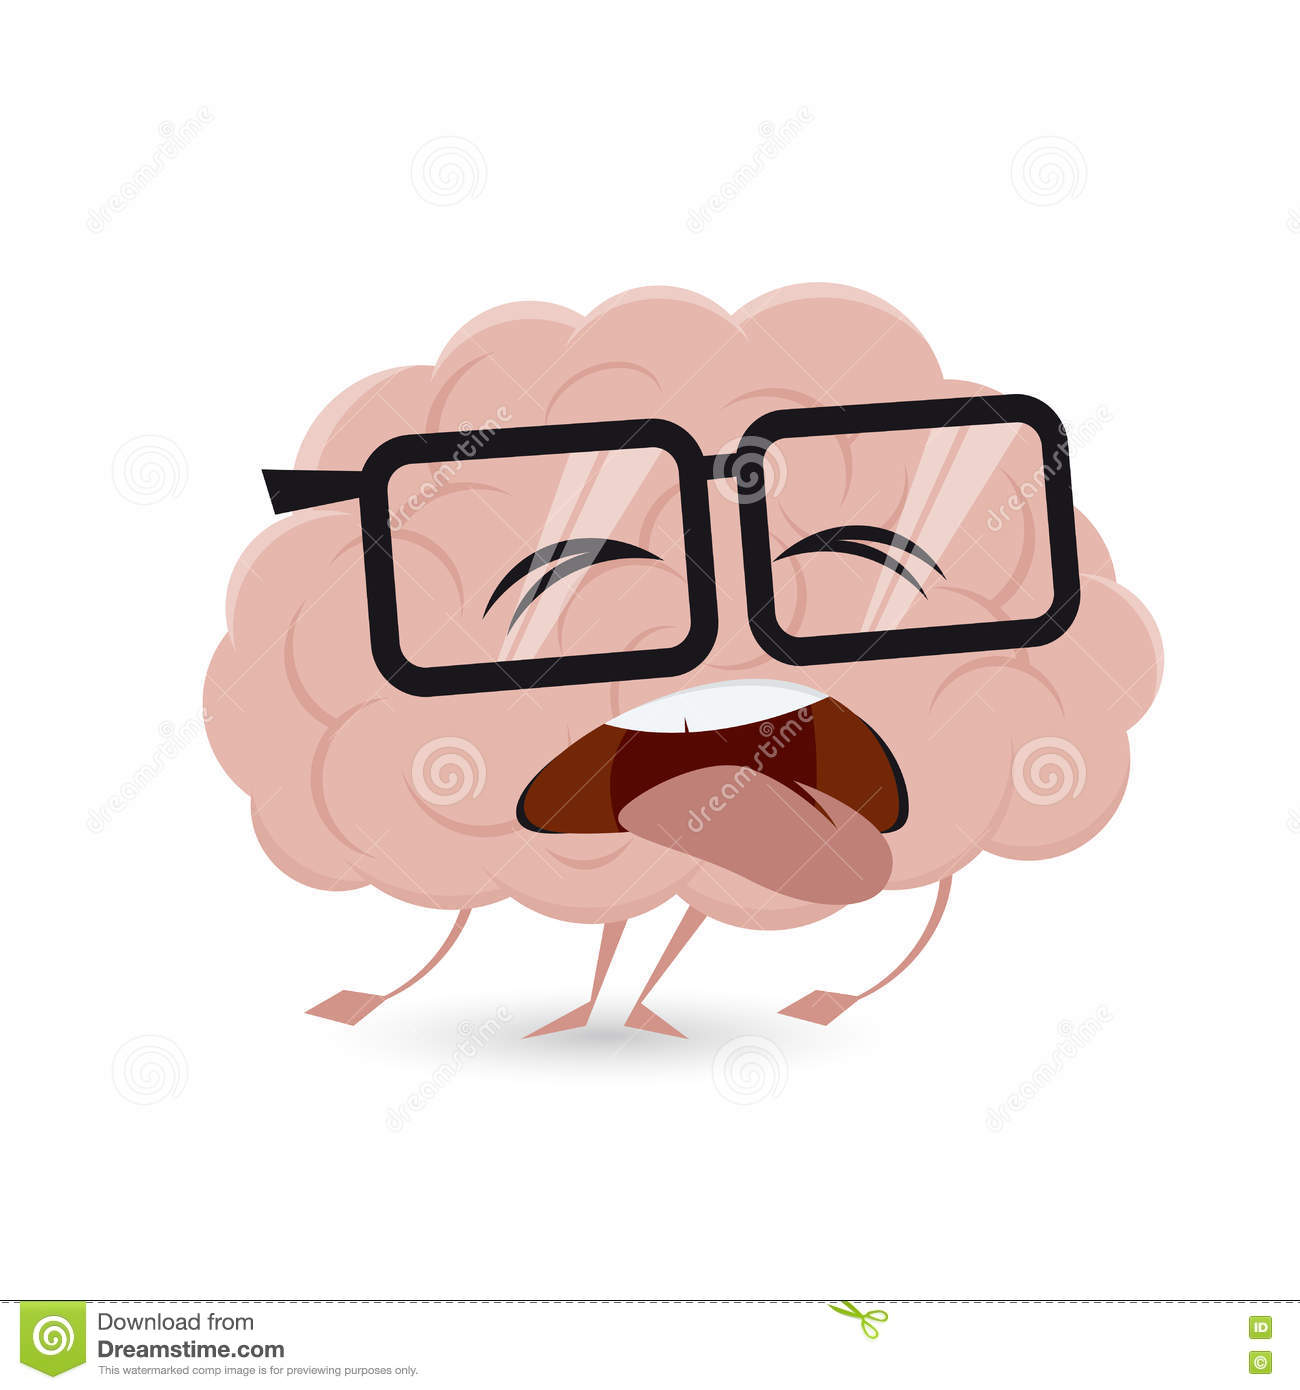 Exhausted brain clipart stock vector. Illustration of cute.